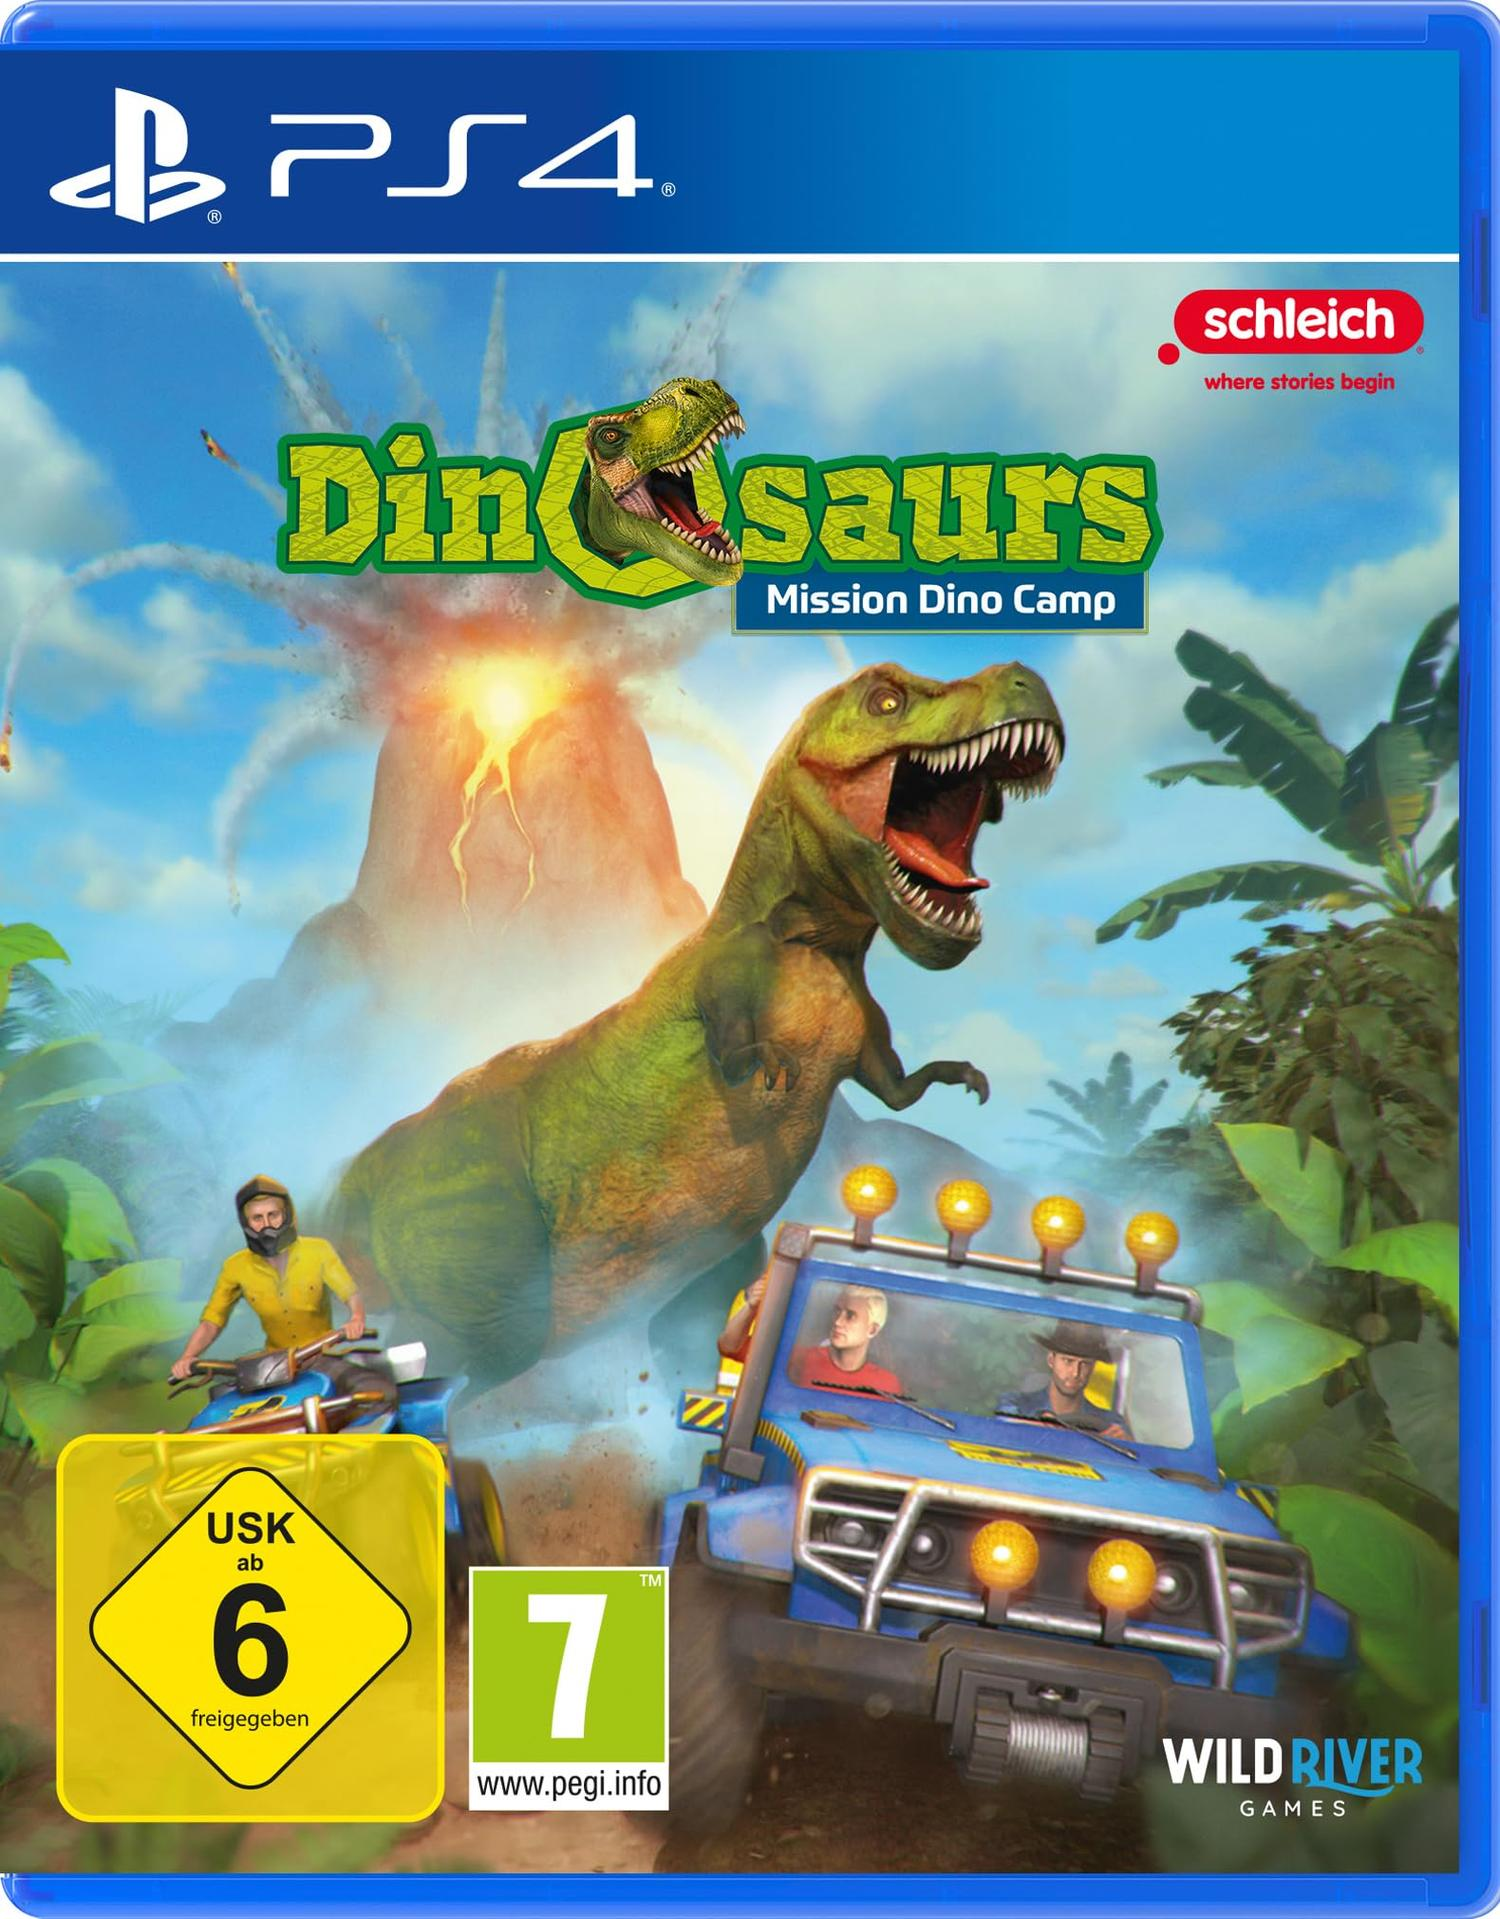 PS4 Schleich Dinosaurs Mission Dino 4] Camp [PlayStation 